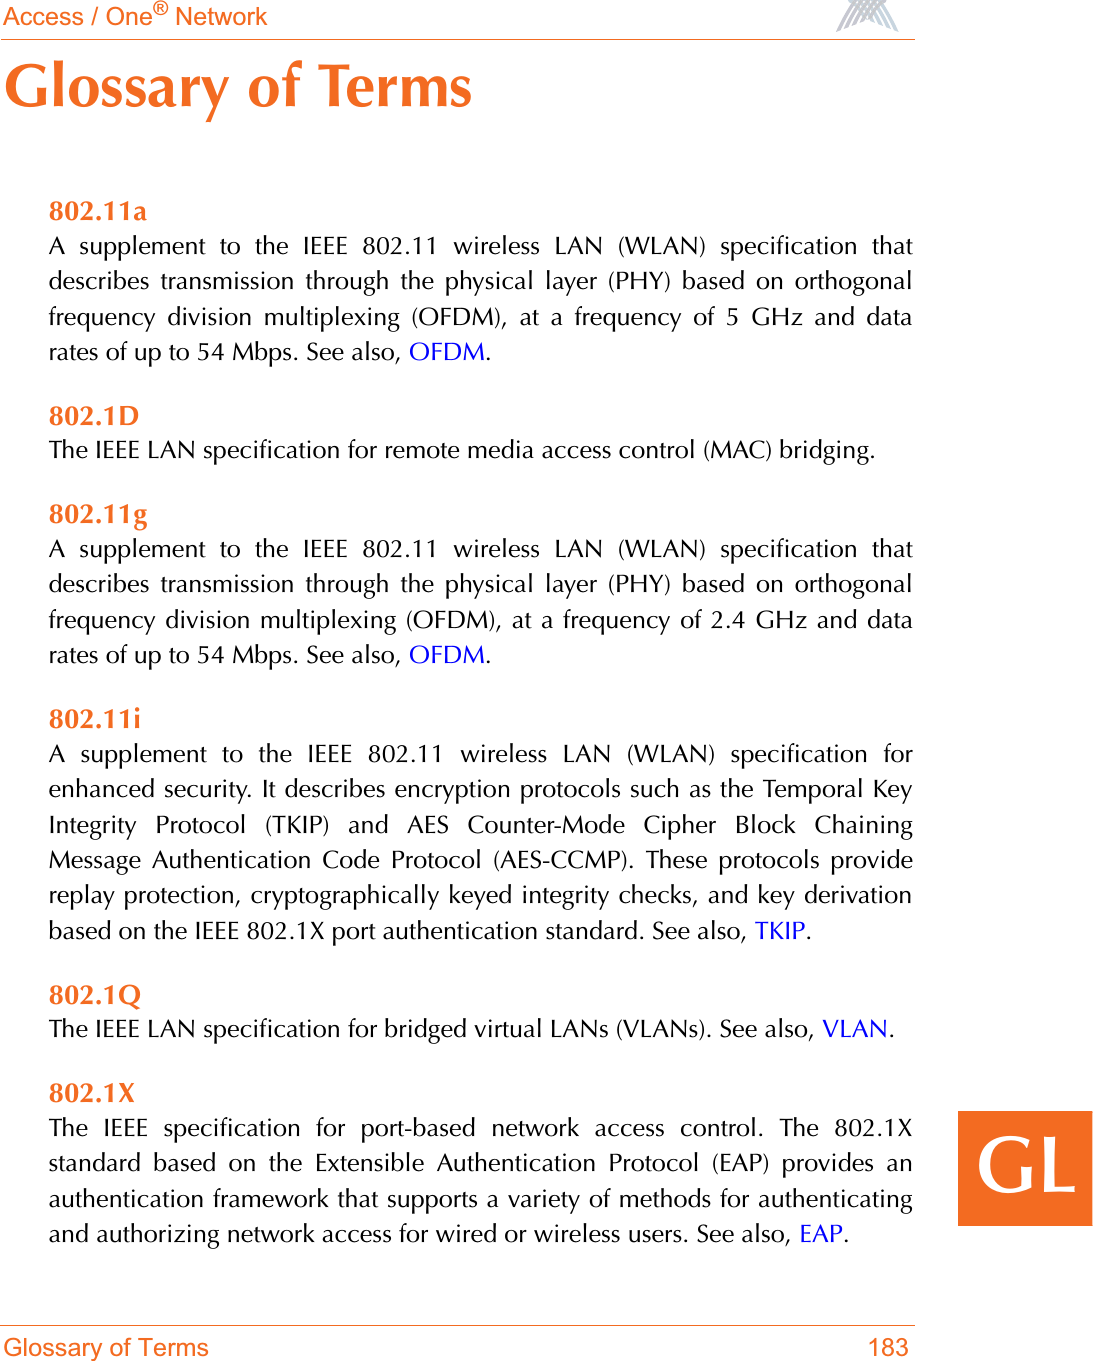 Access / One® NetworkGlossary of Terms 183GLGlossary of Terms802.11aA supplement to the IEEE 802.11 wireless LAN (WLAN) specification thatdescribes transmission through the physical layer (PHY) based on orthogonalfrequency division multiplexing (OFDM), at a frequency of 5 GHz and datarates of up to 54 Mbps. See also, OFDM.802.1DThe IEEE LAN specification for remote media access control (MAC) bridging.802.11gA supplement to the IEEE 802.11 wireless LAN (WLAN) specification thatdescribes transmission through the physical layer (PHY) based on orthogonalfrequency division multiplexing (OFDM), at a frequency of 2.4 GHz and datarates of up to 54 Mbps. See also, OFDM.802.11iA supplement to the IEEE 802.11 wireless LAN (WLAN) specification forenhanced security. It describes encryption protocols such as the Temporal KeyIntegrity Protocol (TKIP) and AES Counter-Mode Cipher Block ChainingMessage Authentication Code Protocol (AES-CCMP). These protocols providereplay protection, cryptographically keyed integrity checks, and key derivationbased on the IEEE 802.1X port authentication standard. See also, TKIP.802.1QThe IEEE LAN specification for bridged virtual LANs (VLANs). See also, VLAN.802.1XThe IEEE specification for port-based network access control. The 802.1Xstandard based on the Extensible Authentication Protocol (EAP) provides anauthentication framework that supports a variety of methods for authenticatingand authorizing network access for wired or wireless users. See also, EAP.